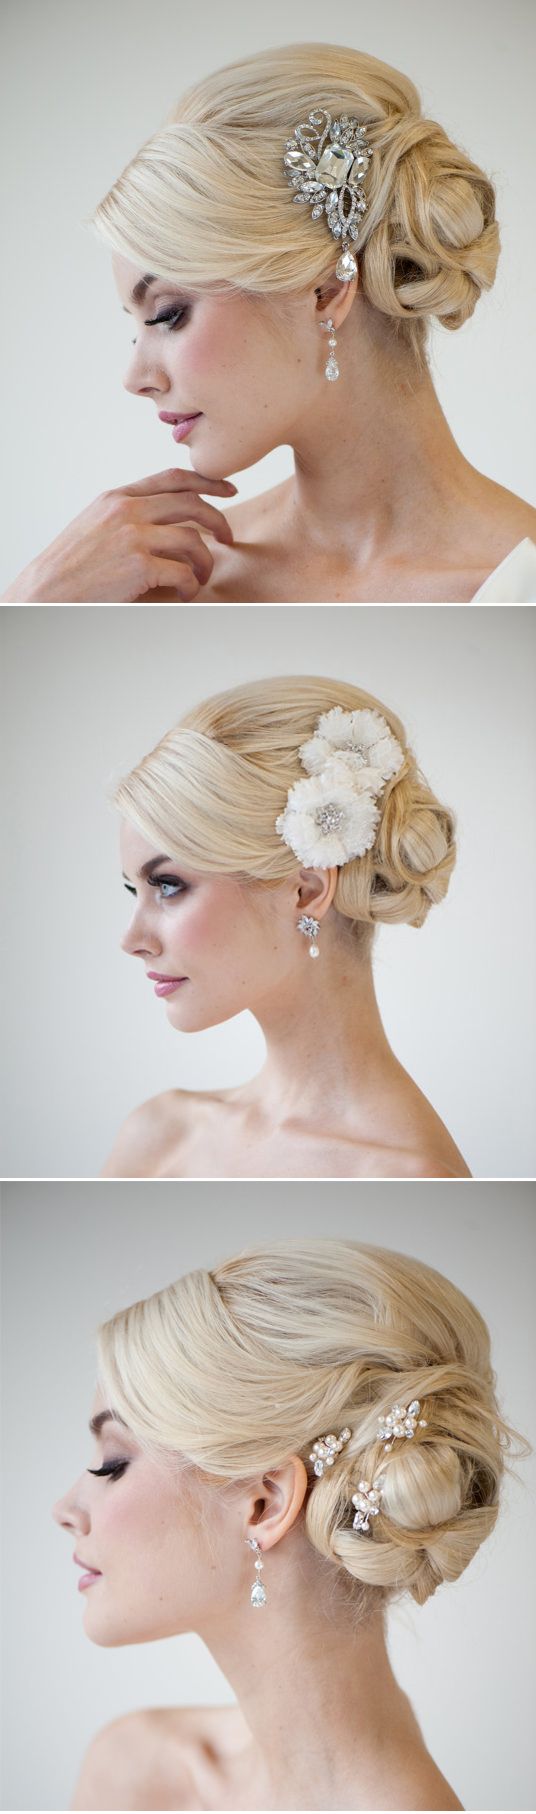 Mariage - ♥~•~♥  ► Hair *•..¸♥☼♥¸.•* And Accesories